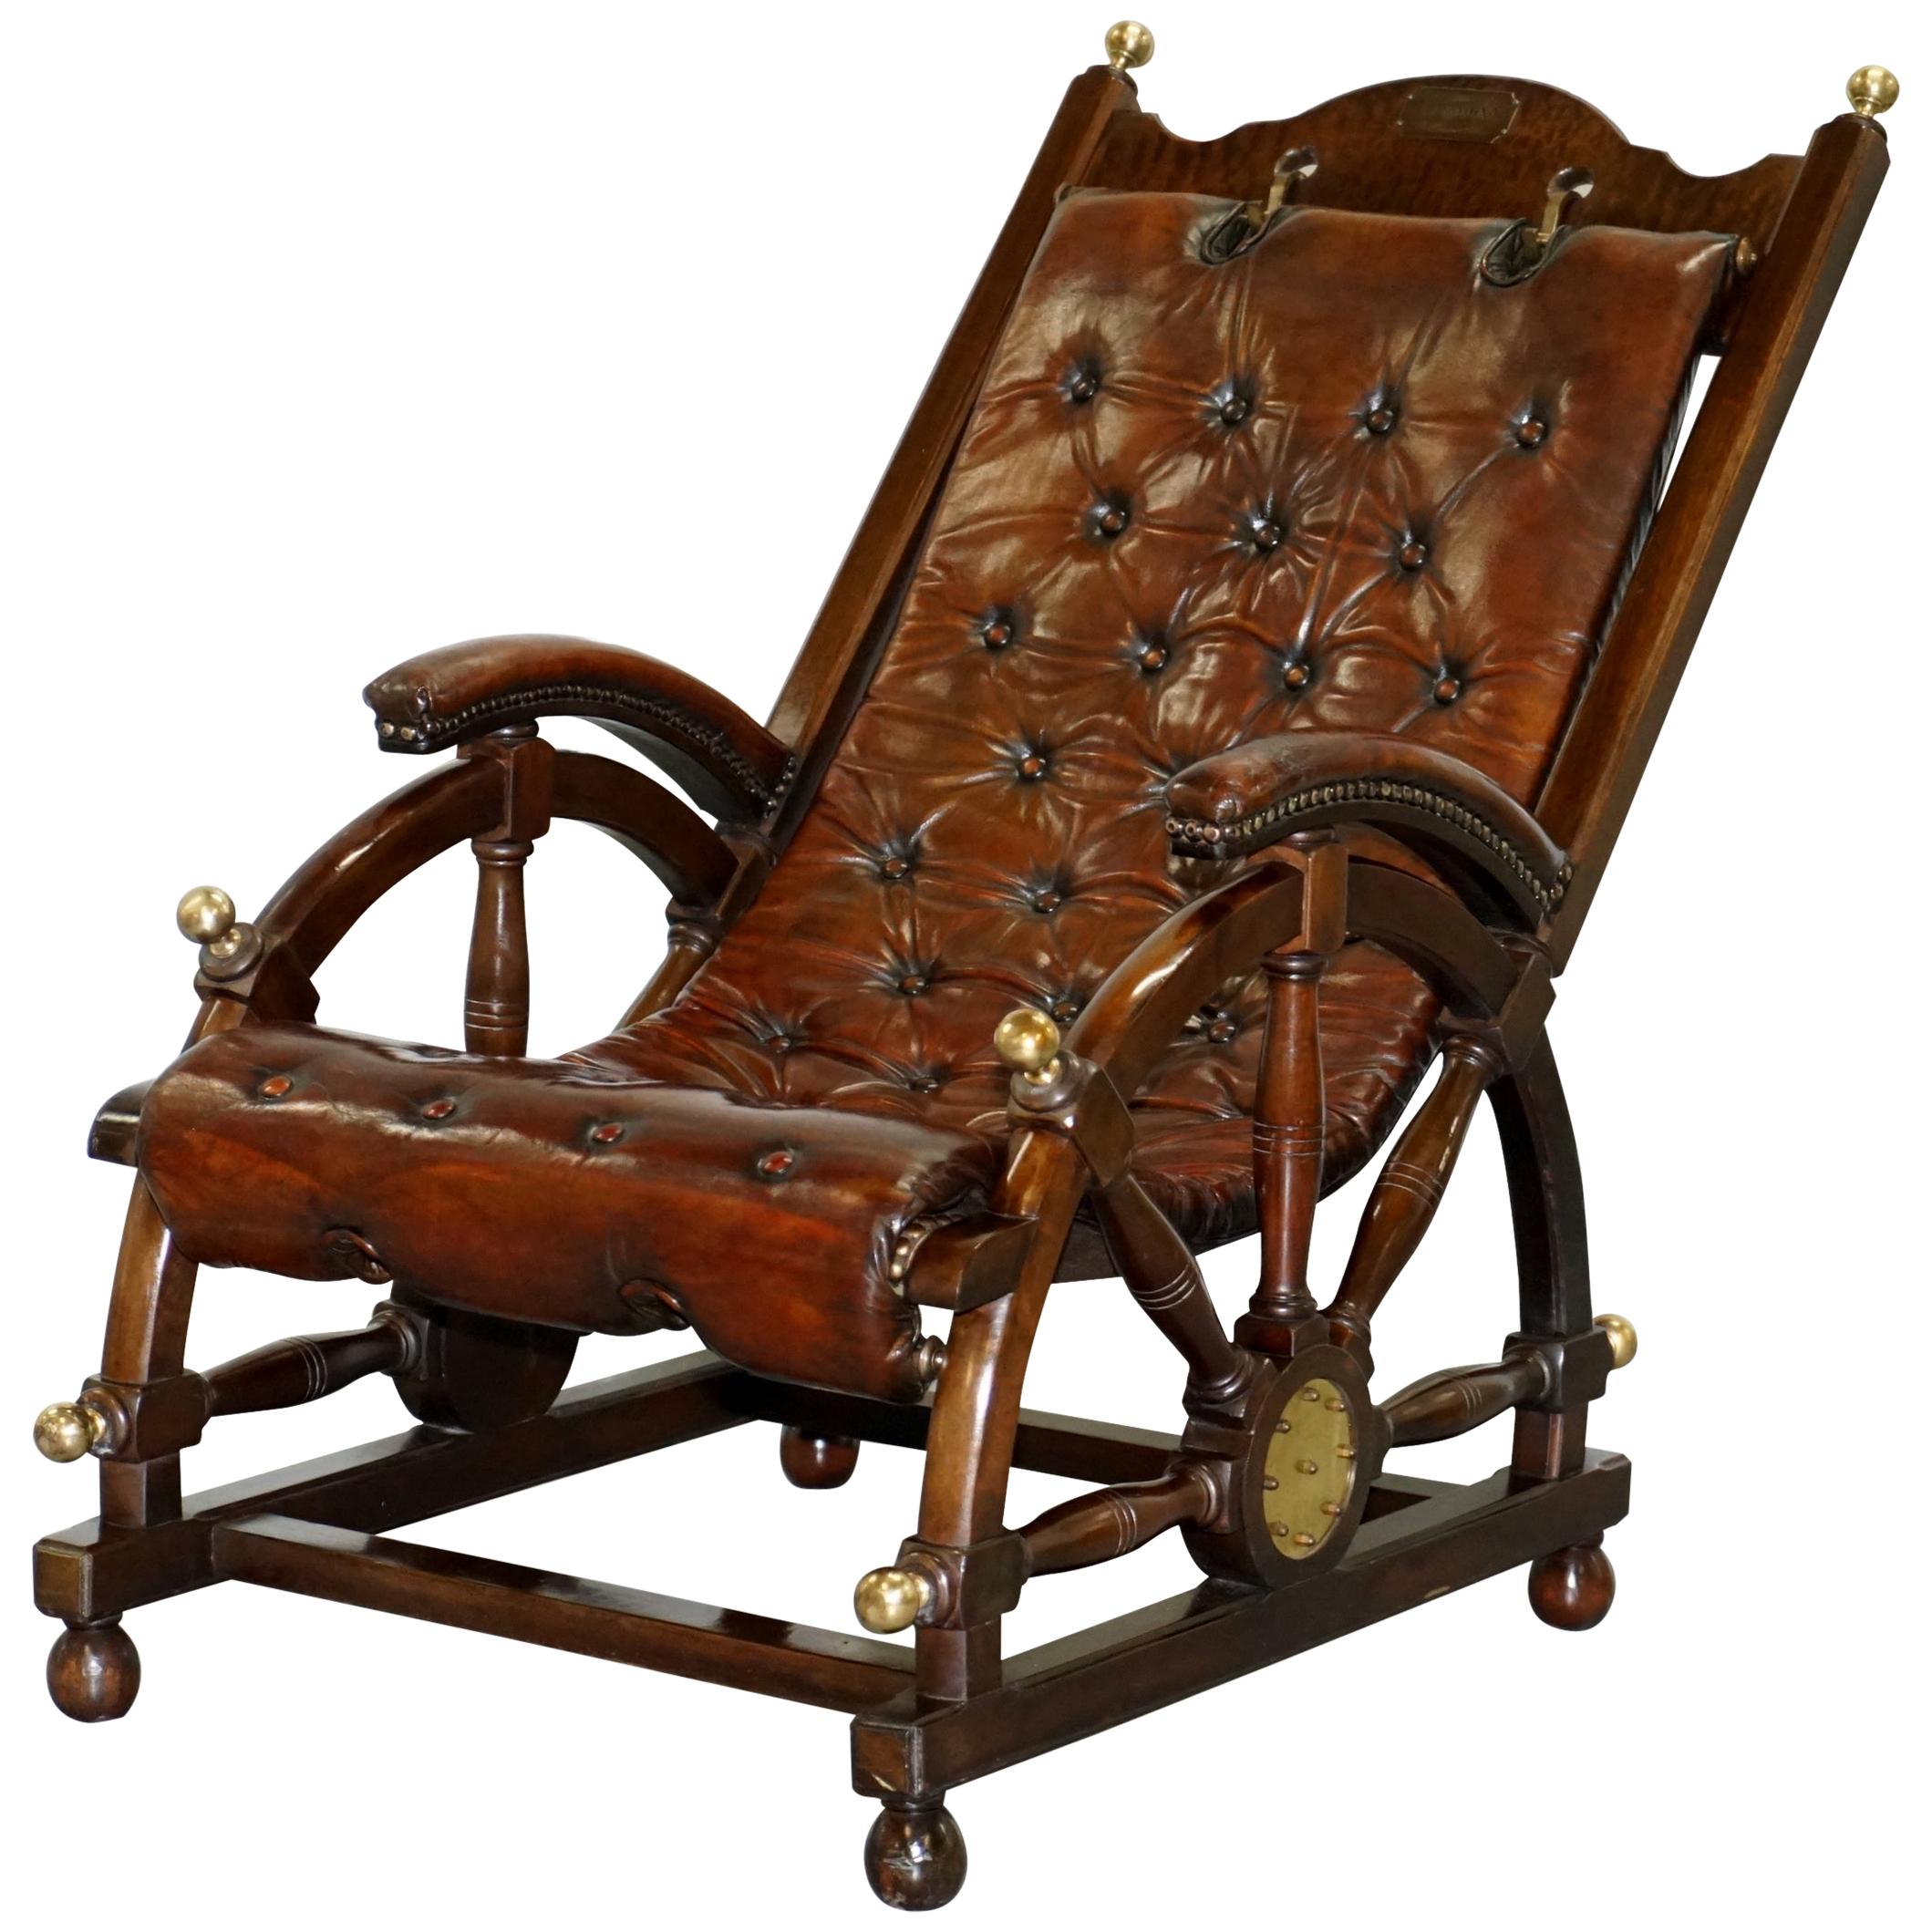 Stamped the Clermont Baltimore 1801 Chesterfield Buttoned Brown Leather Armchair